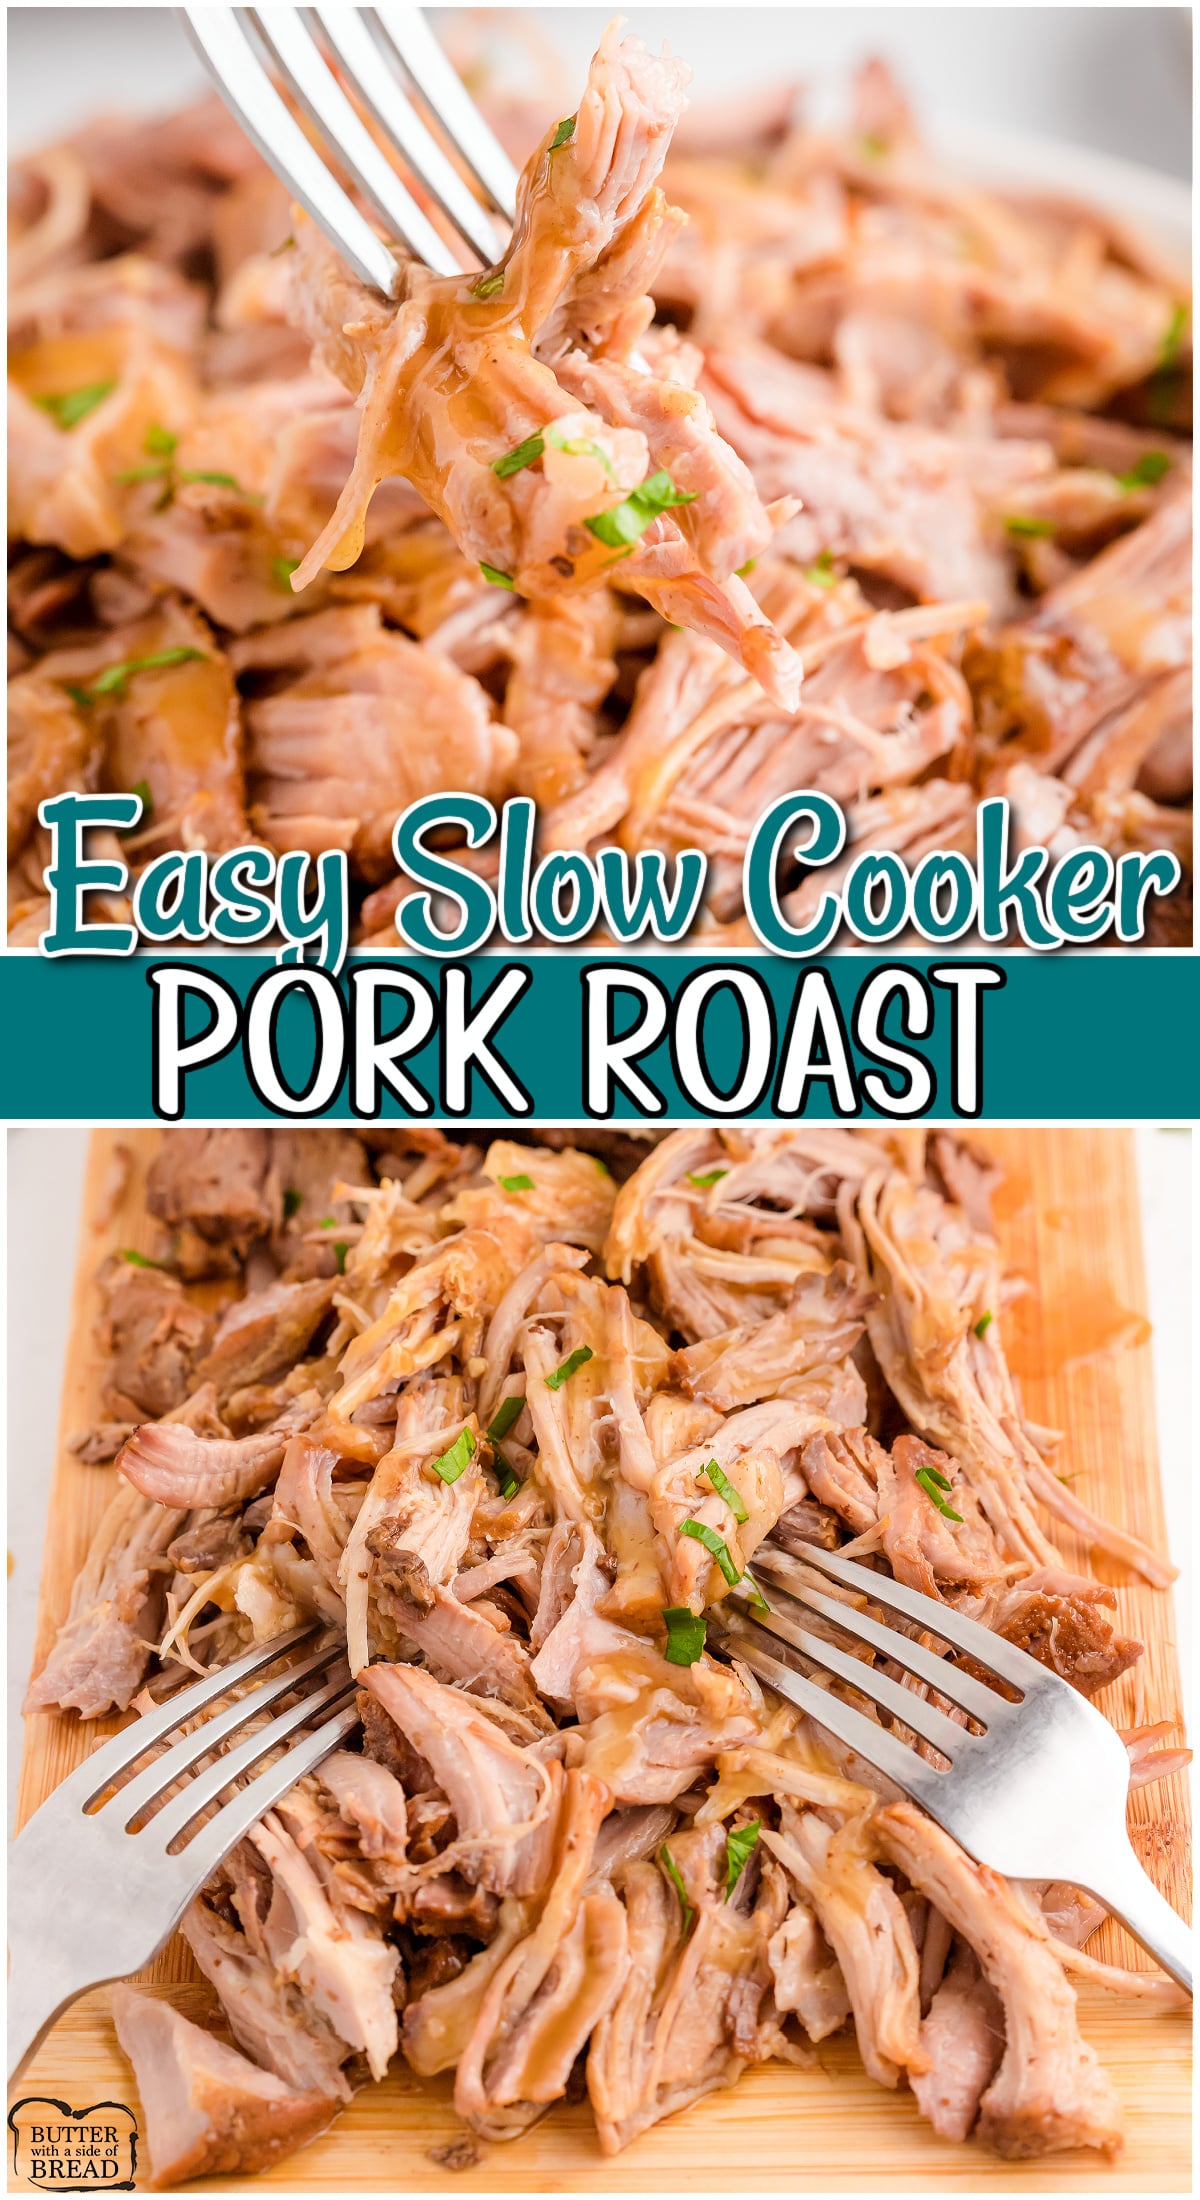 Slow Cooker Pork Roast made with simple ingredients, ready to cook in minutes! Fall-apart tender pork with a flavorful gravy on top make this crock pot pork recipe incredible.